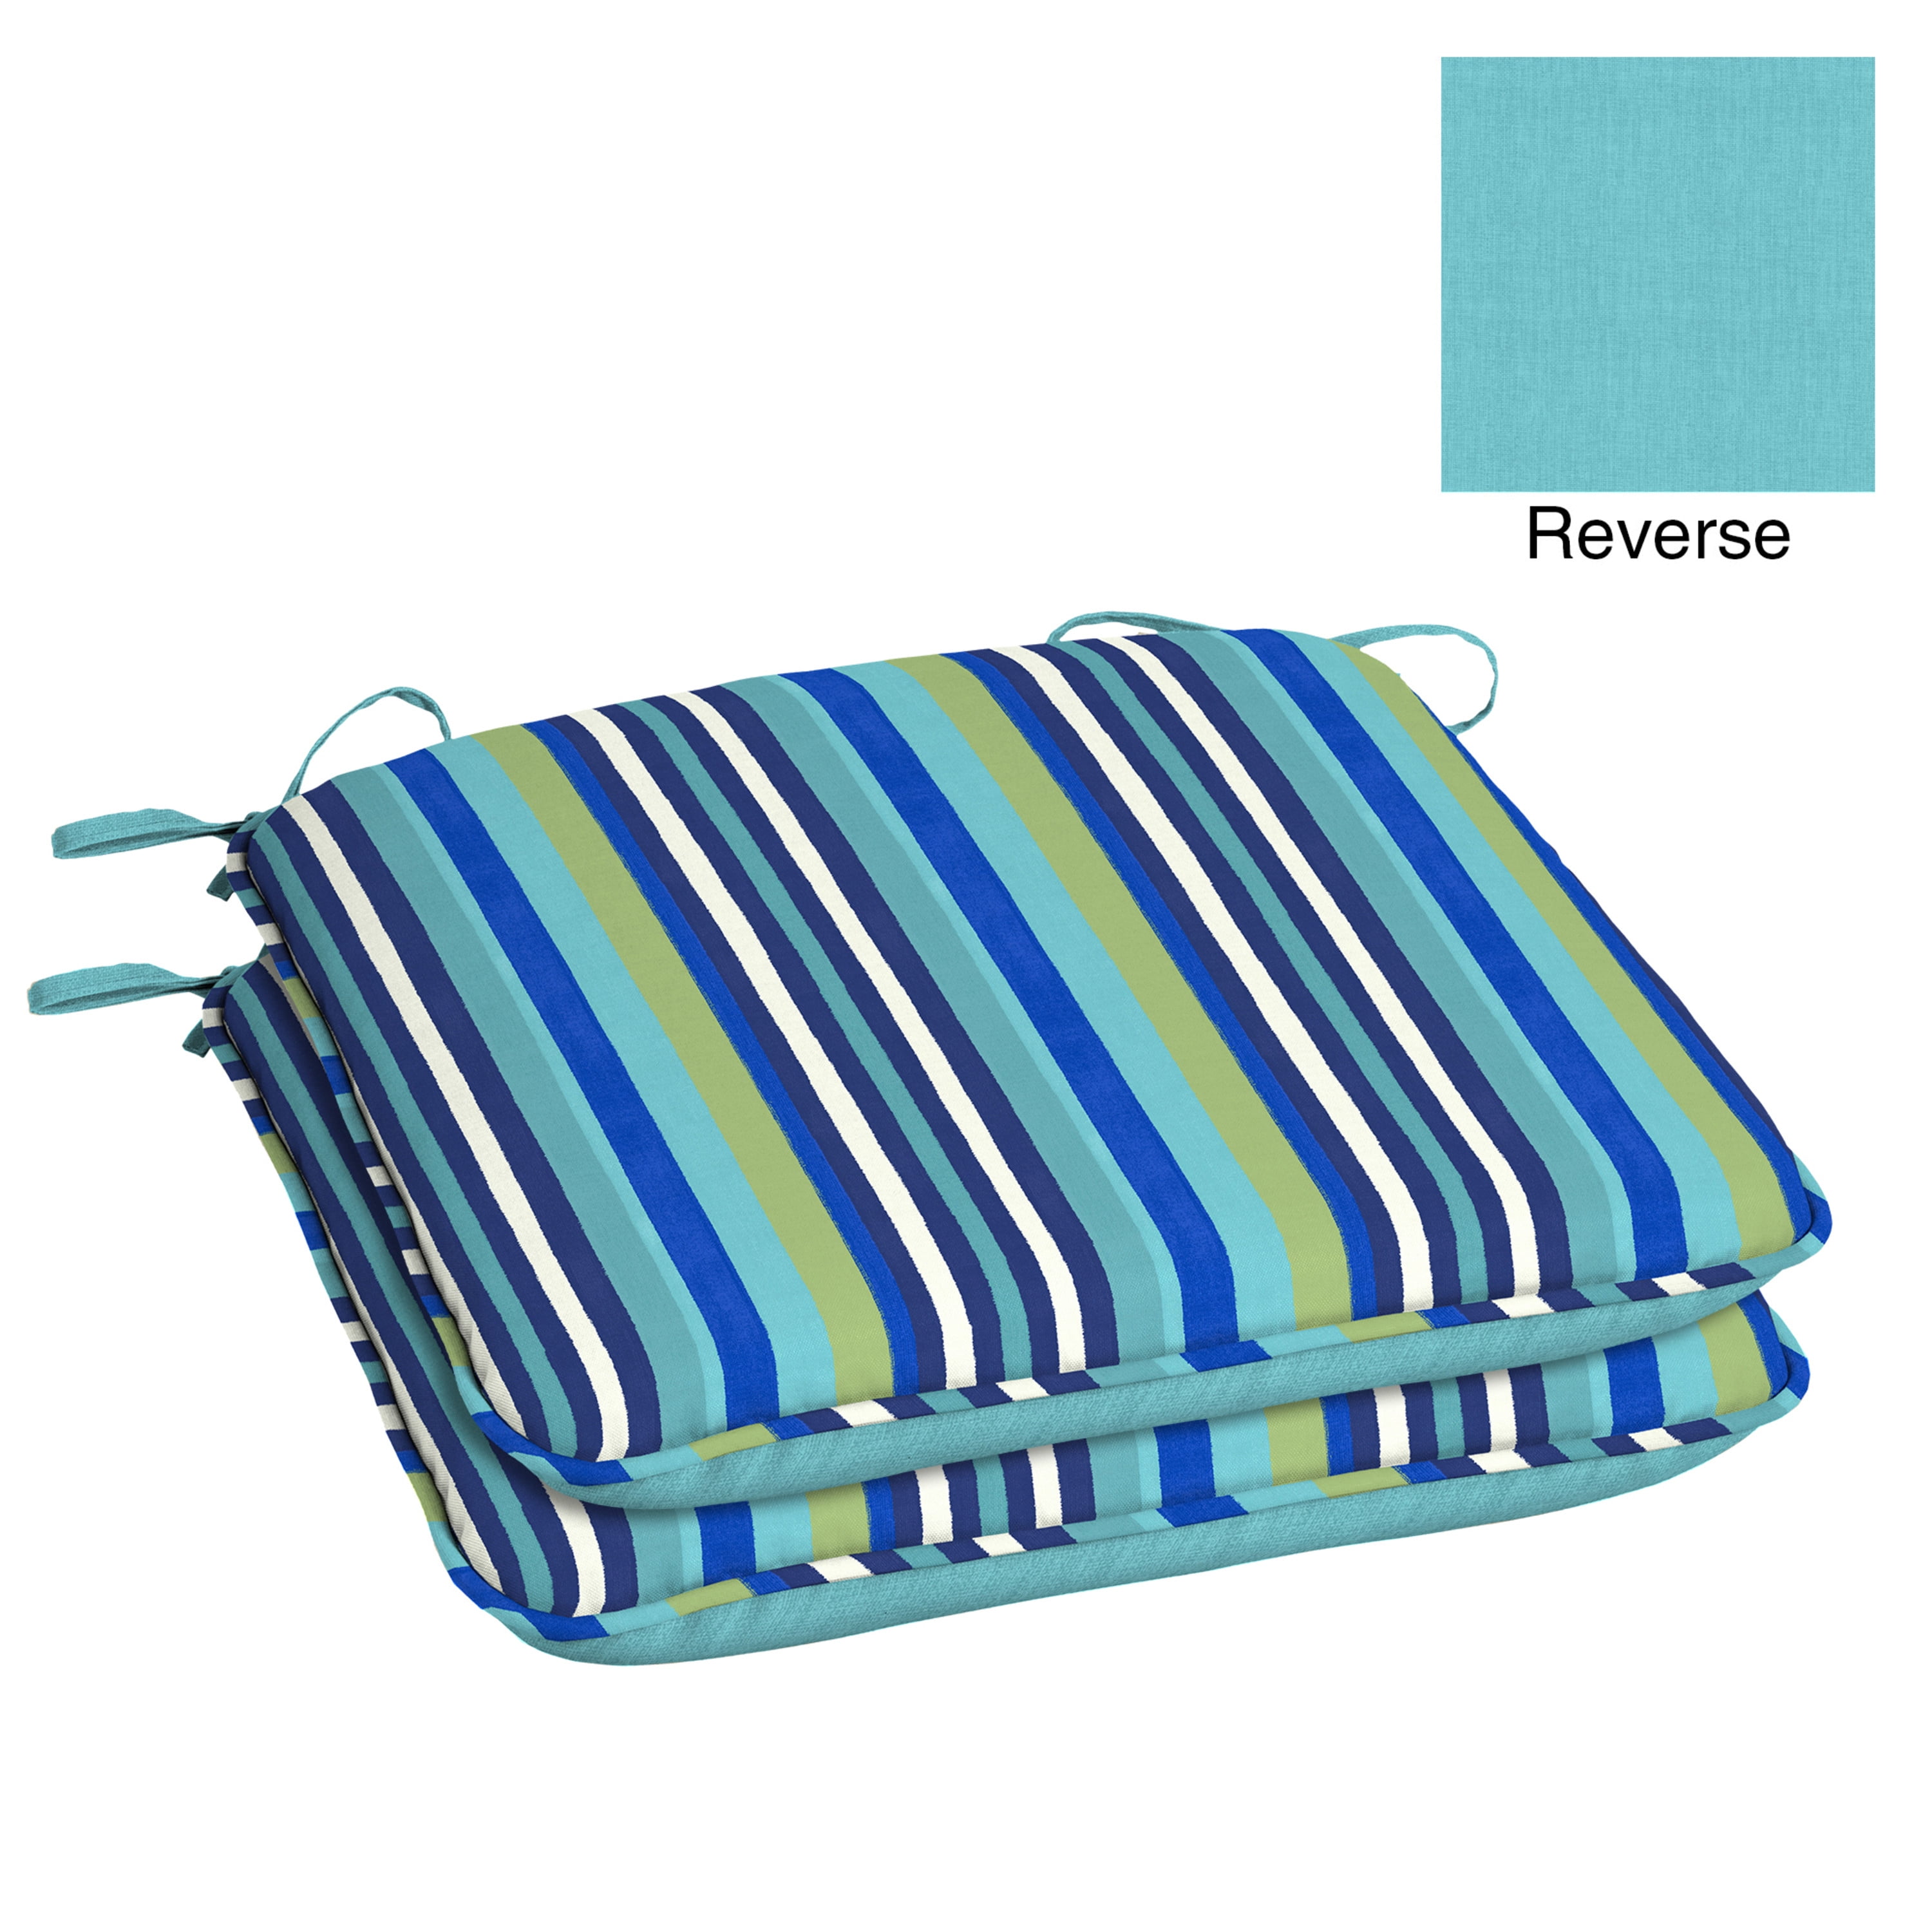 Garden Chair Seat Pad/Cushion 2 Pack in Turquoise Fits Securely with Tie Strings and Elasticated Pull Over on Back Great for Indoors and Outdoors Made from Water Resistant Material. 